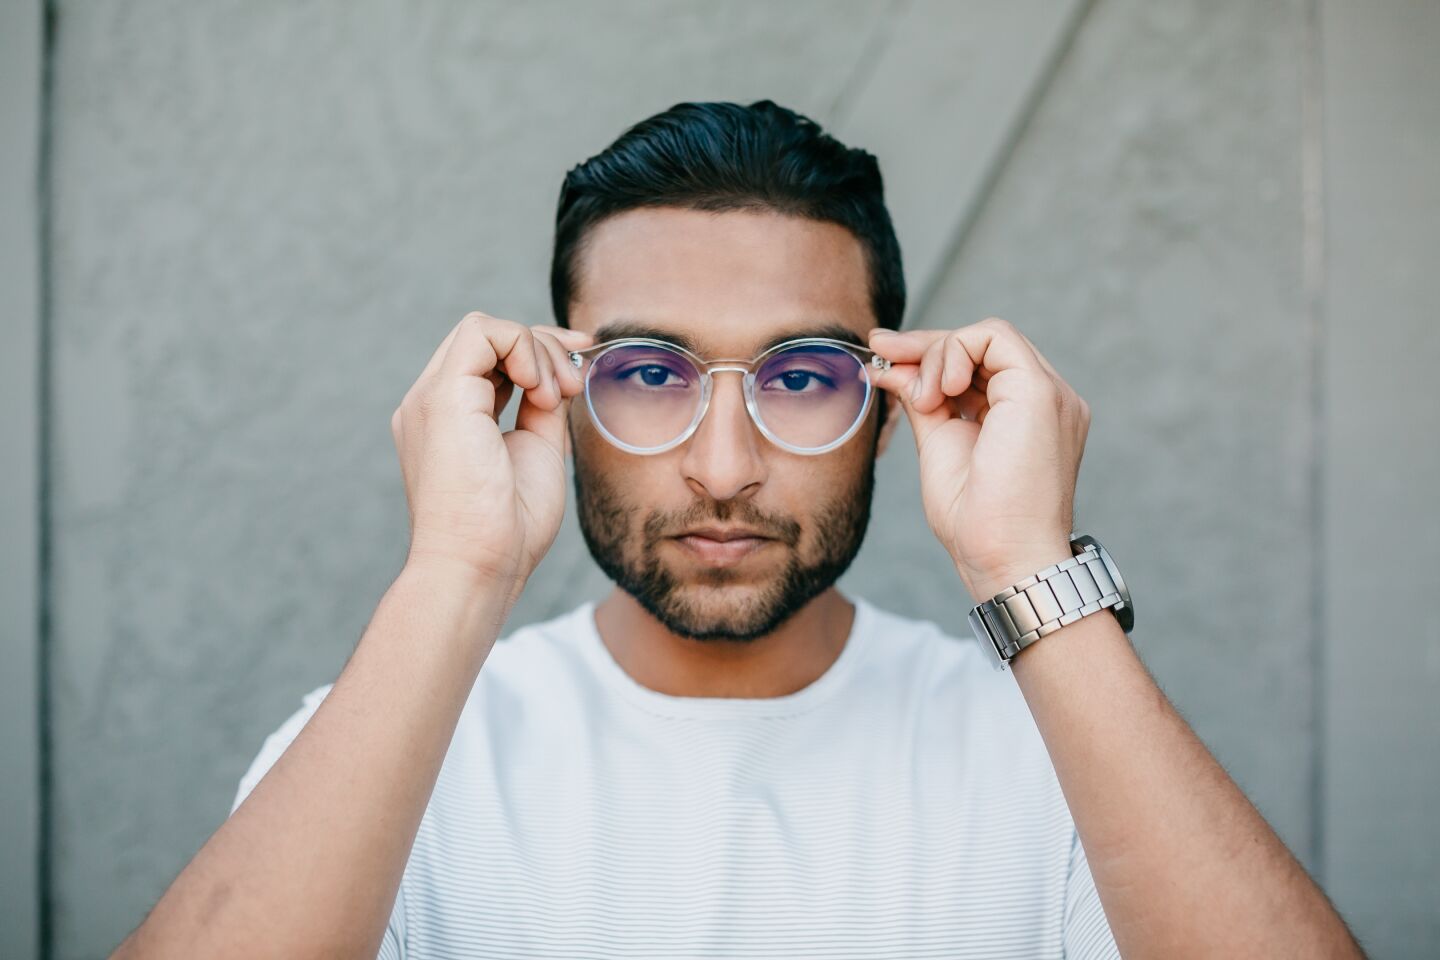 Blenders released two new lines of blue light lenses, expanding from sunglasses into indoor eyewear. Pictured is Clearly Wild from the Coastal collection.